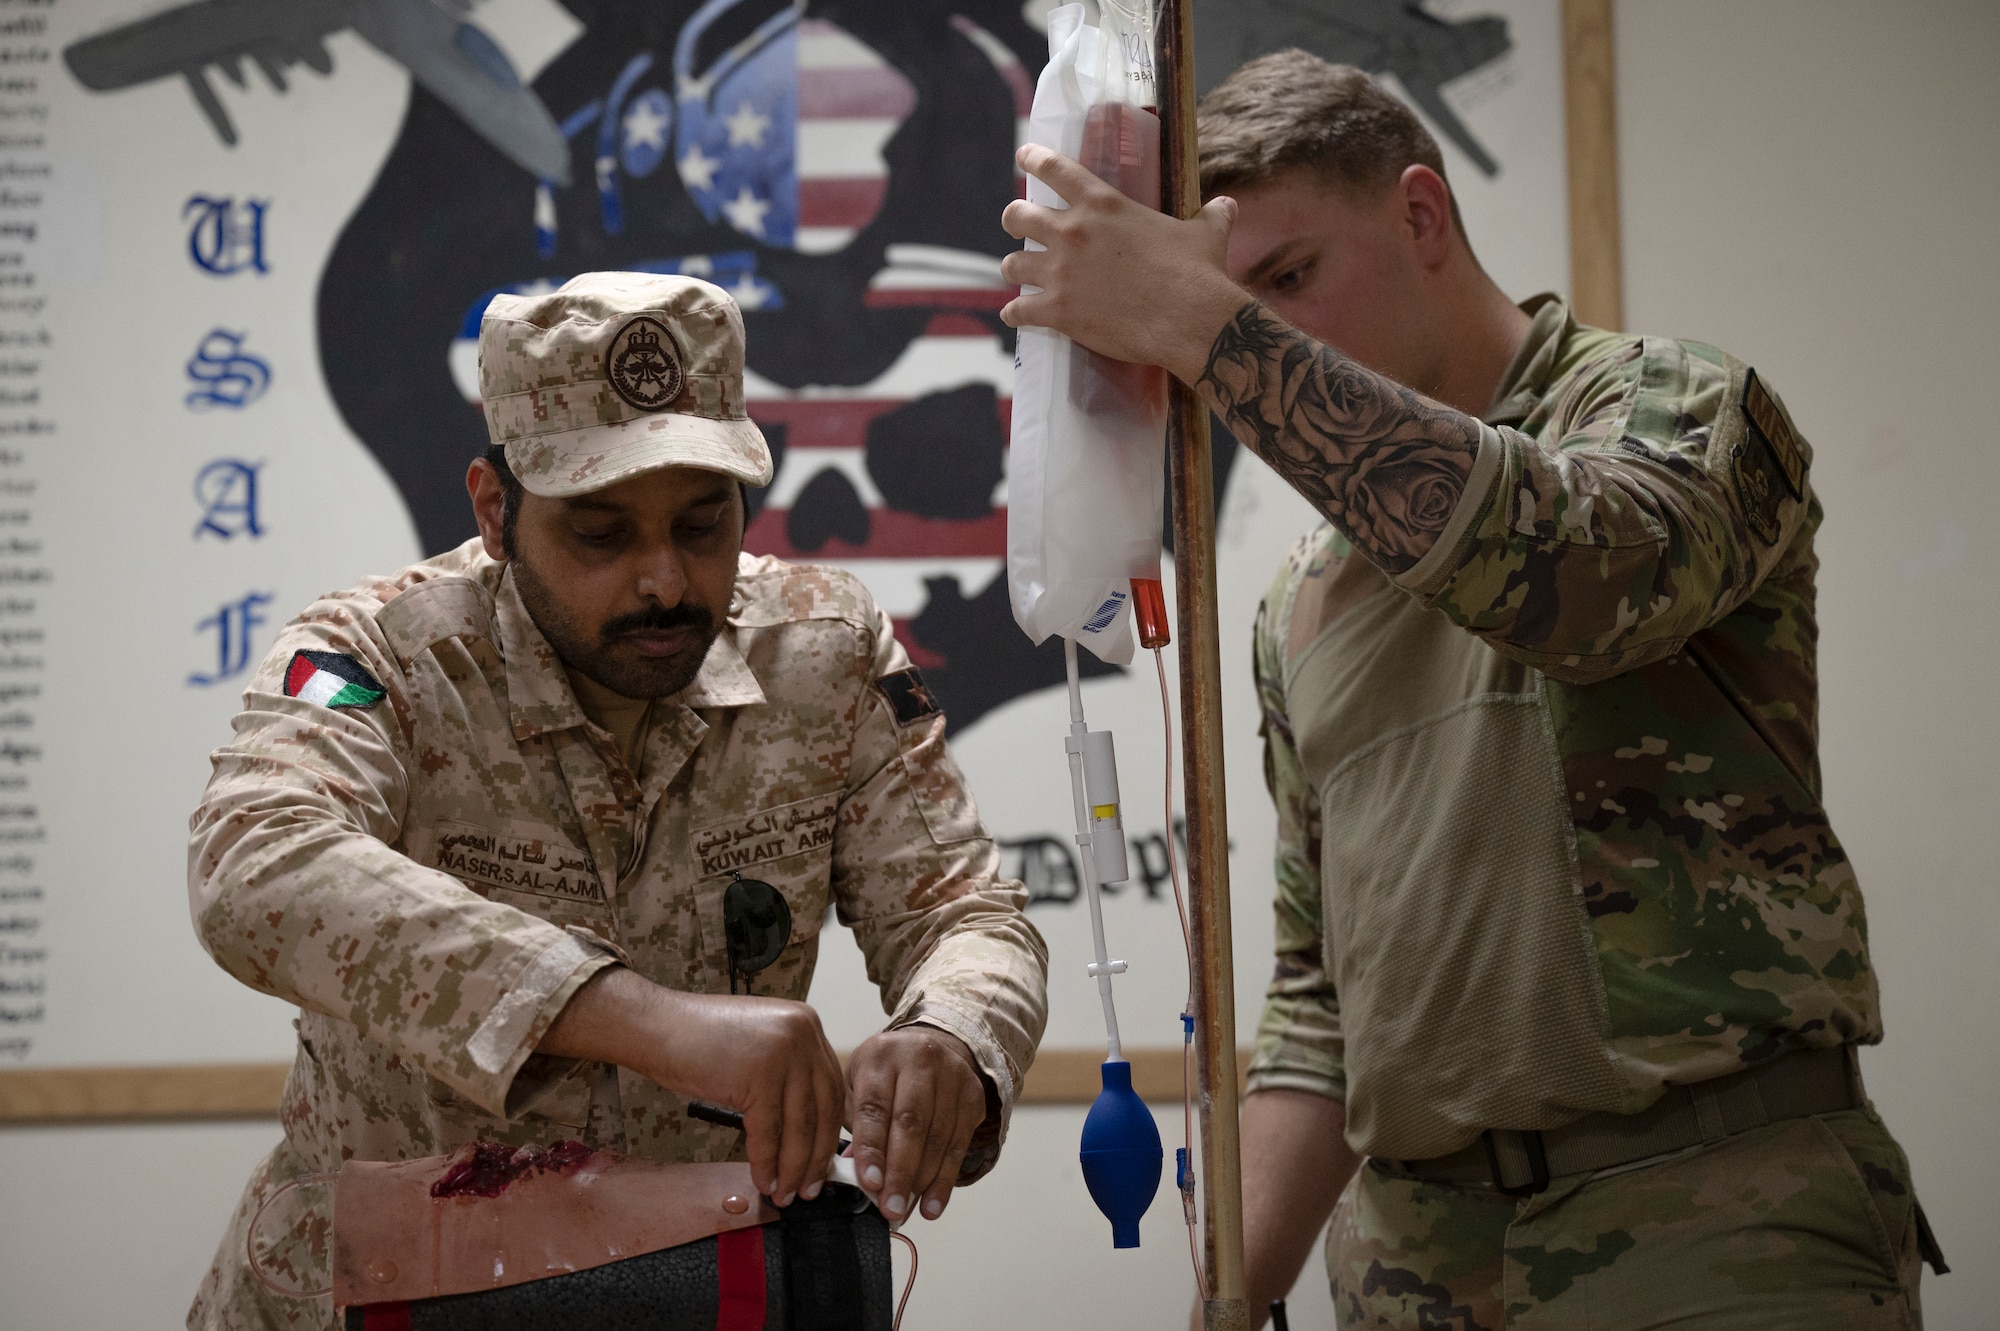 A Kuwait Army firefighter demonstrates how to properly apply a tourniquet to stop bleeding during a Tactical Combat Casualty Care class taught by Airman 1st Class Alex Moore, 386th Expeditionary Medical Squadron aerospace medical technician, September 14, 2022. Prior to the training, the 386th Expeditionary Civil Engineer Squadron fire department were able to craft a simulated, realistic and functioning injury for trainees to practice proper tourniquet application out of spare materials they had in the fire department. (U.S. Air Force photo by Staff Sgt. Dalton Williams)